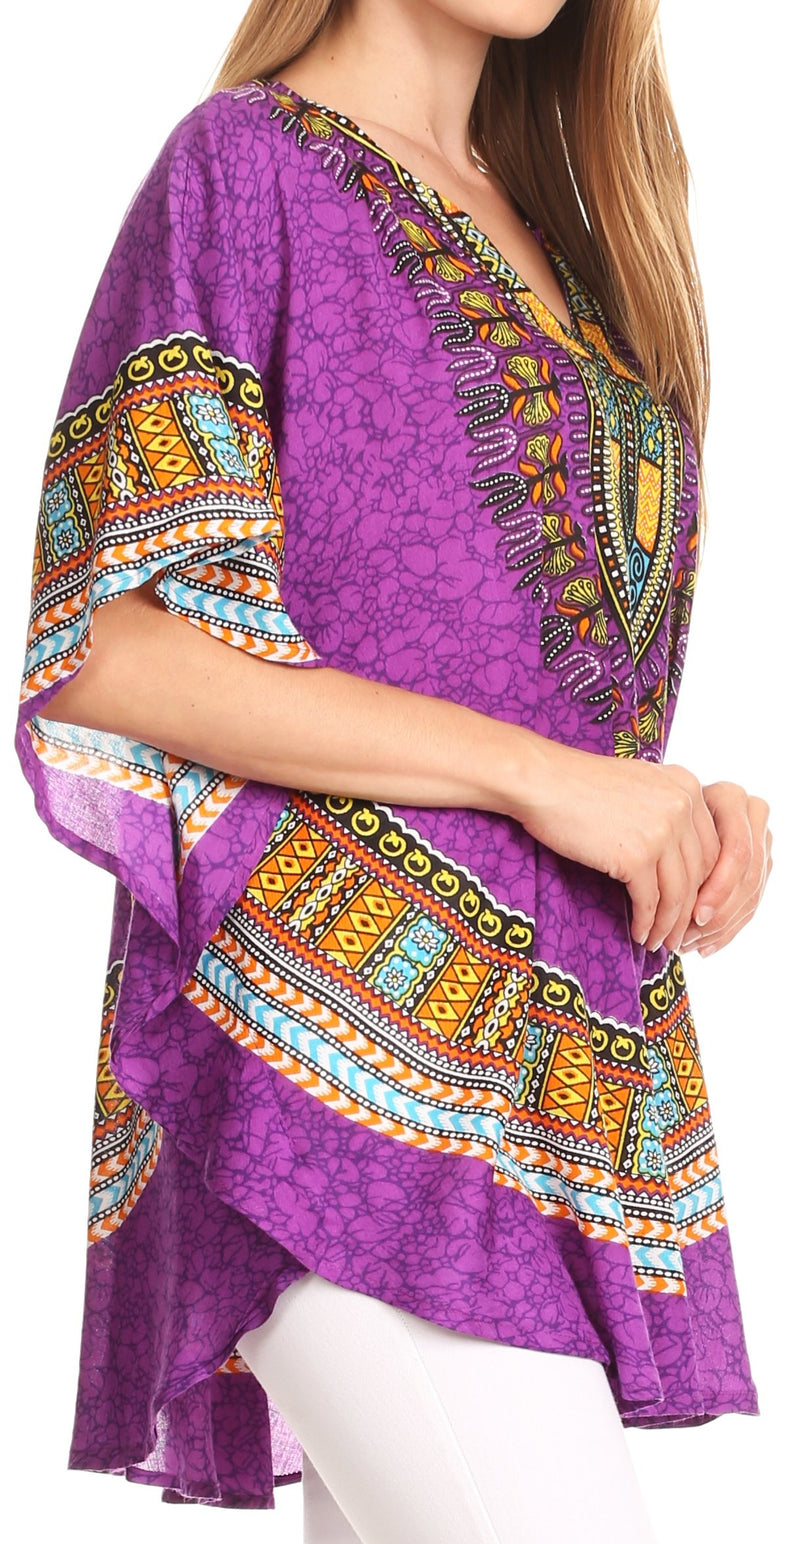 Sakkas Alba Tribal Circle Cover-up Tunic Vibrant Colors Relaxed